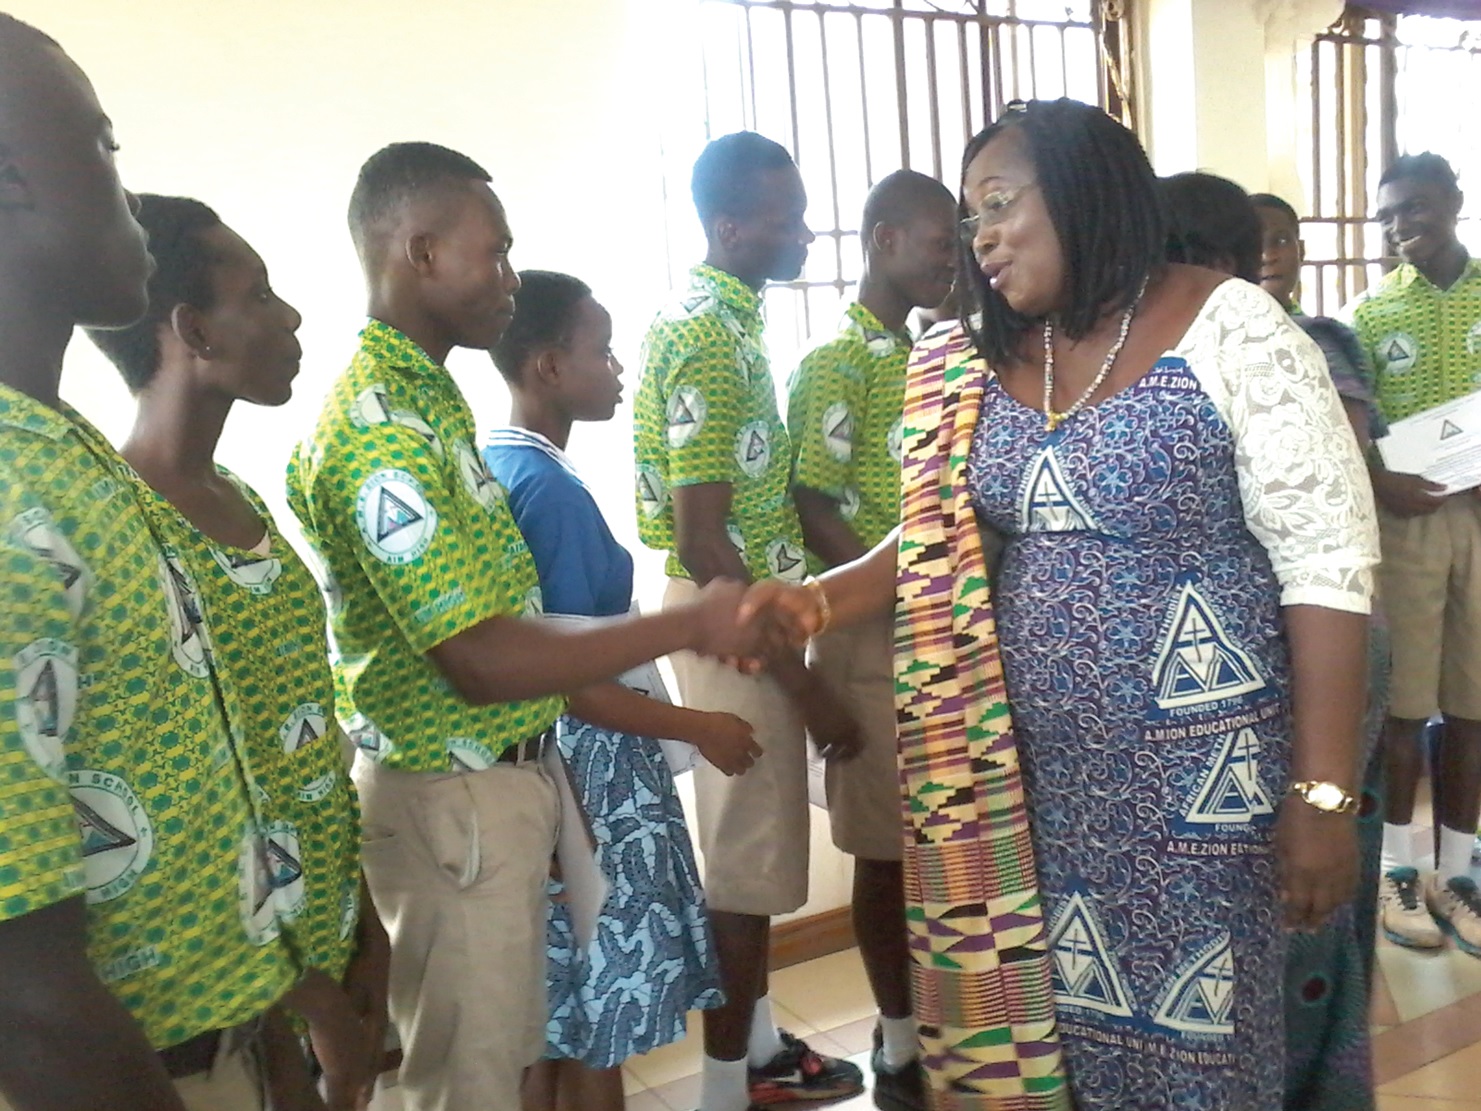 Mrs Evelyn Boakye-Mensah Zormelo, General Manager of the AME Zion Schools, shaking hands with one of the students while the others look on